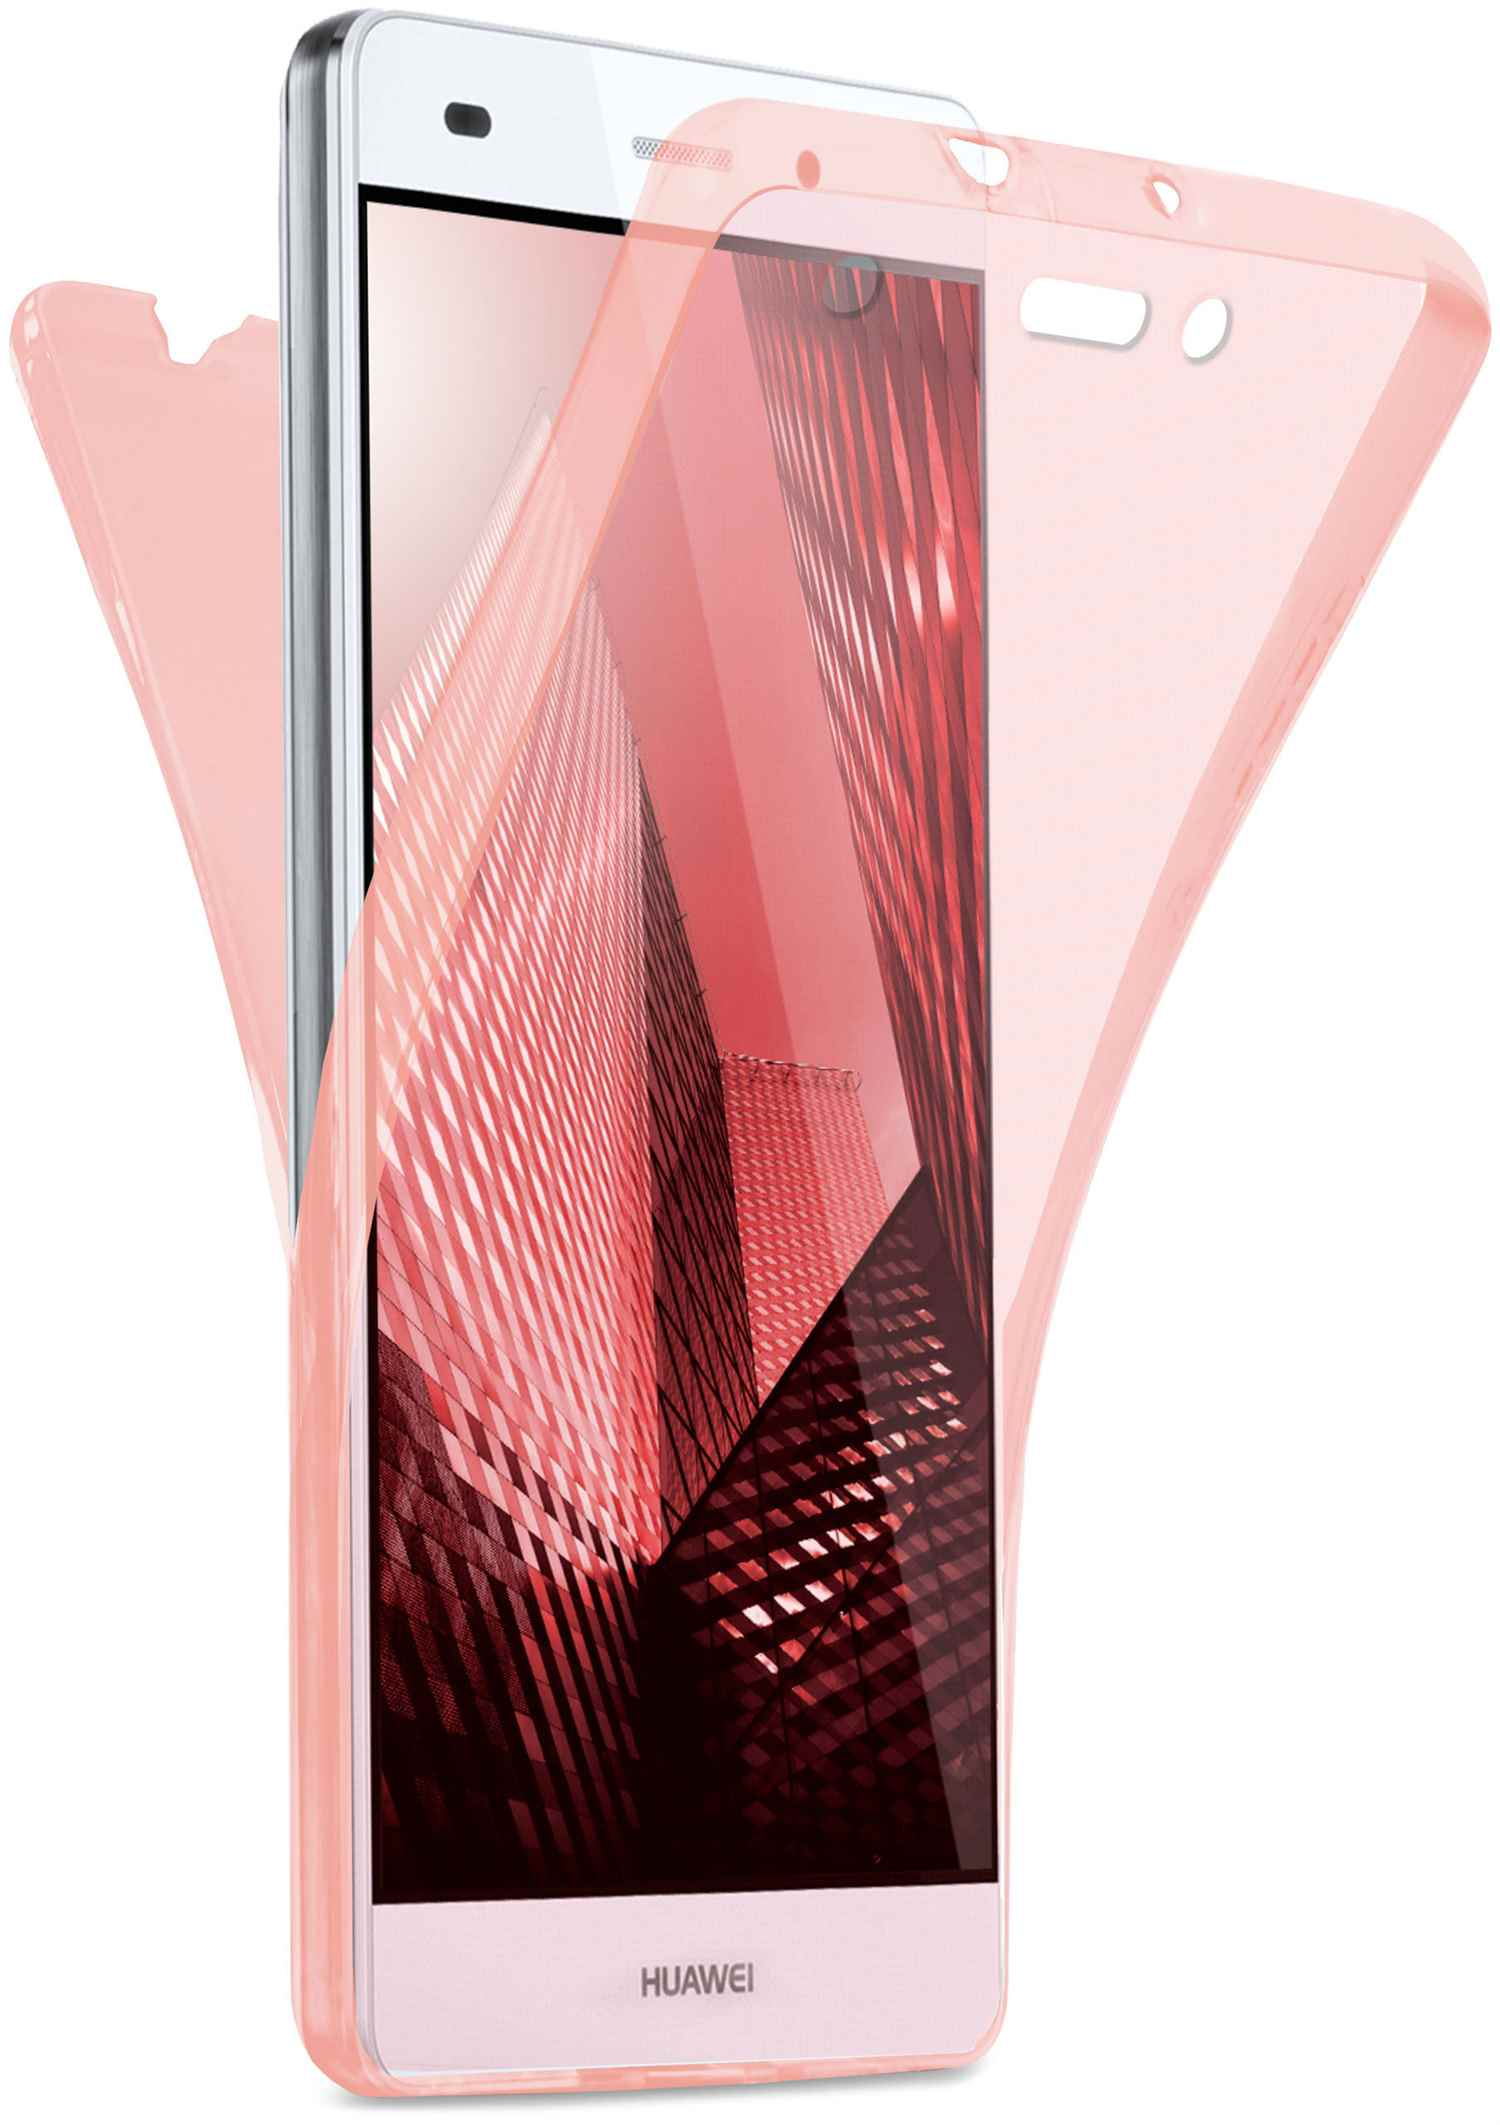 MOEX Double Lite Full P8 Huawei, 2015, Case, Rose Cover